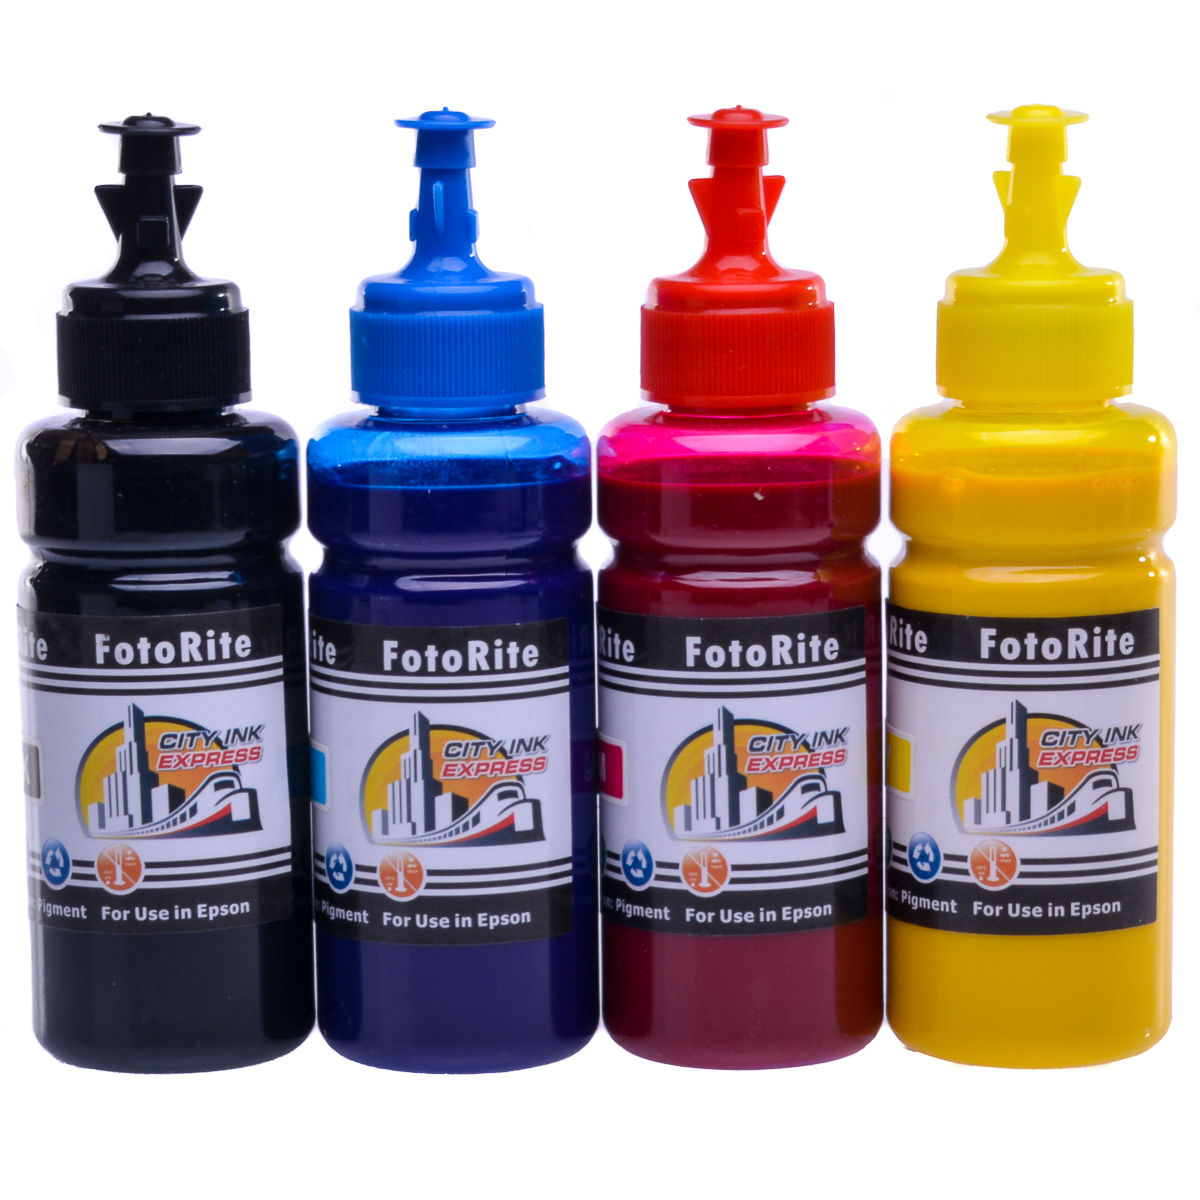 Cheap Multipack pigment ink refill replaces Epson ET-5850